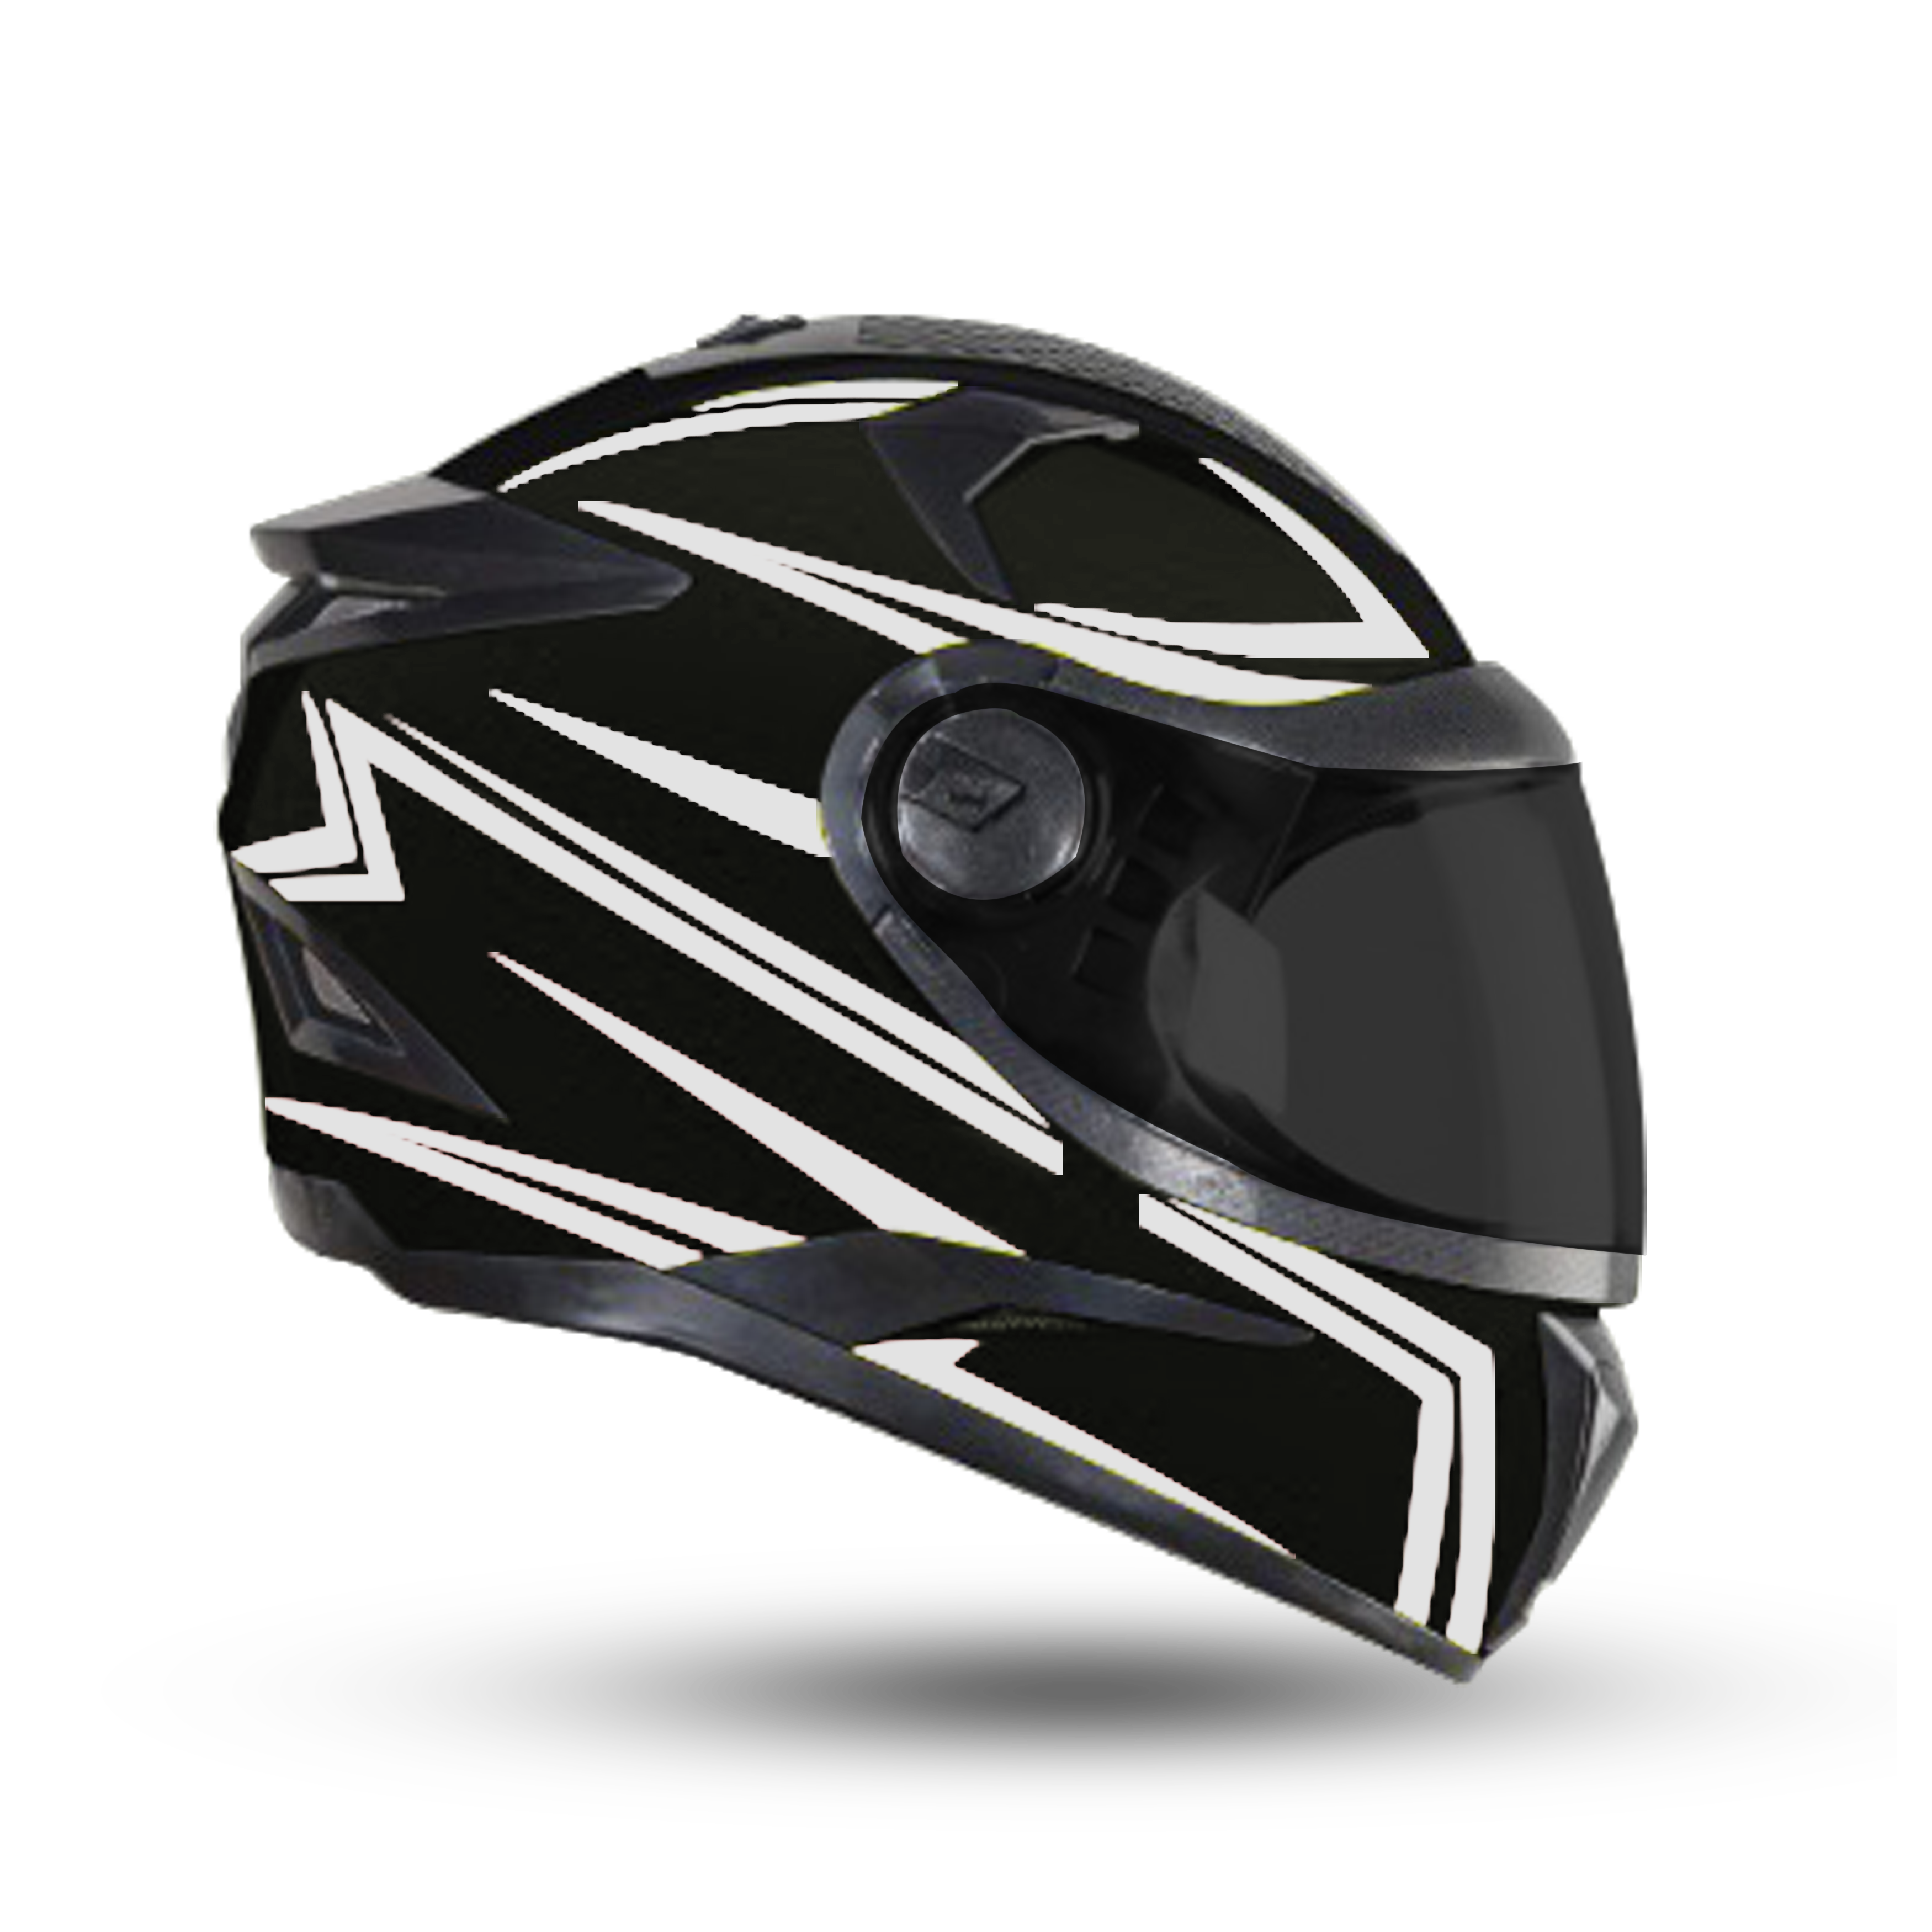 SBH-17 ROBOT REFLECTIVE MAT BLACK WITH SILVER (FITTED WITH CLEAR VISOR EXTRA SMOKE VISOR FREE)